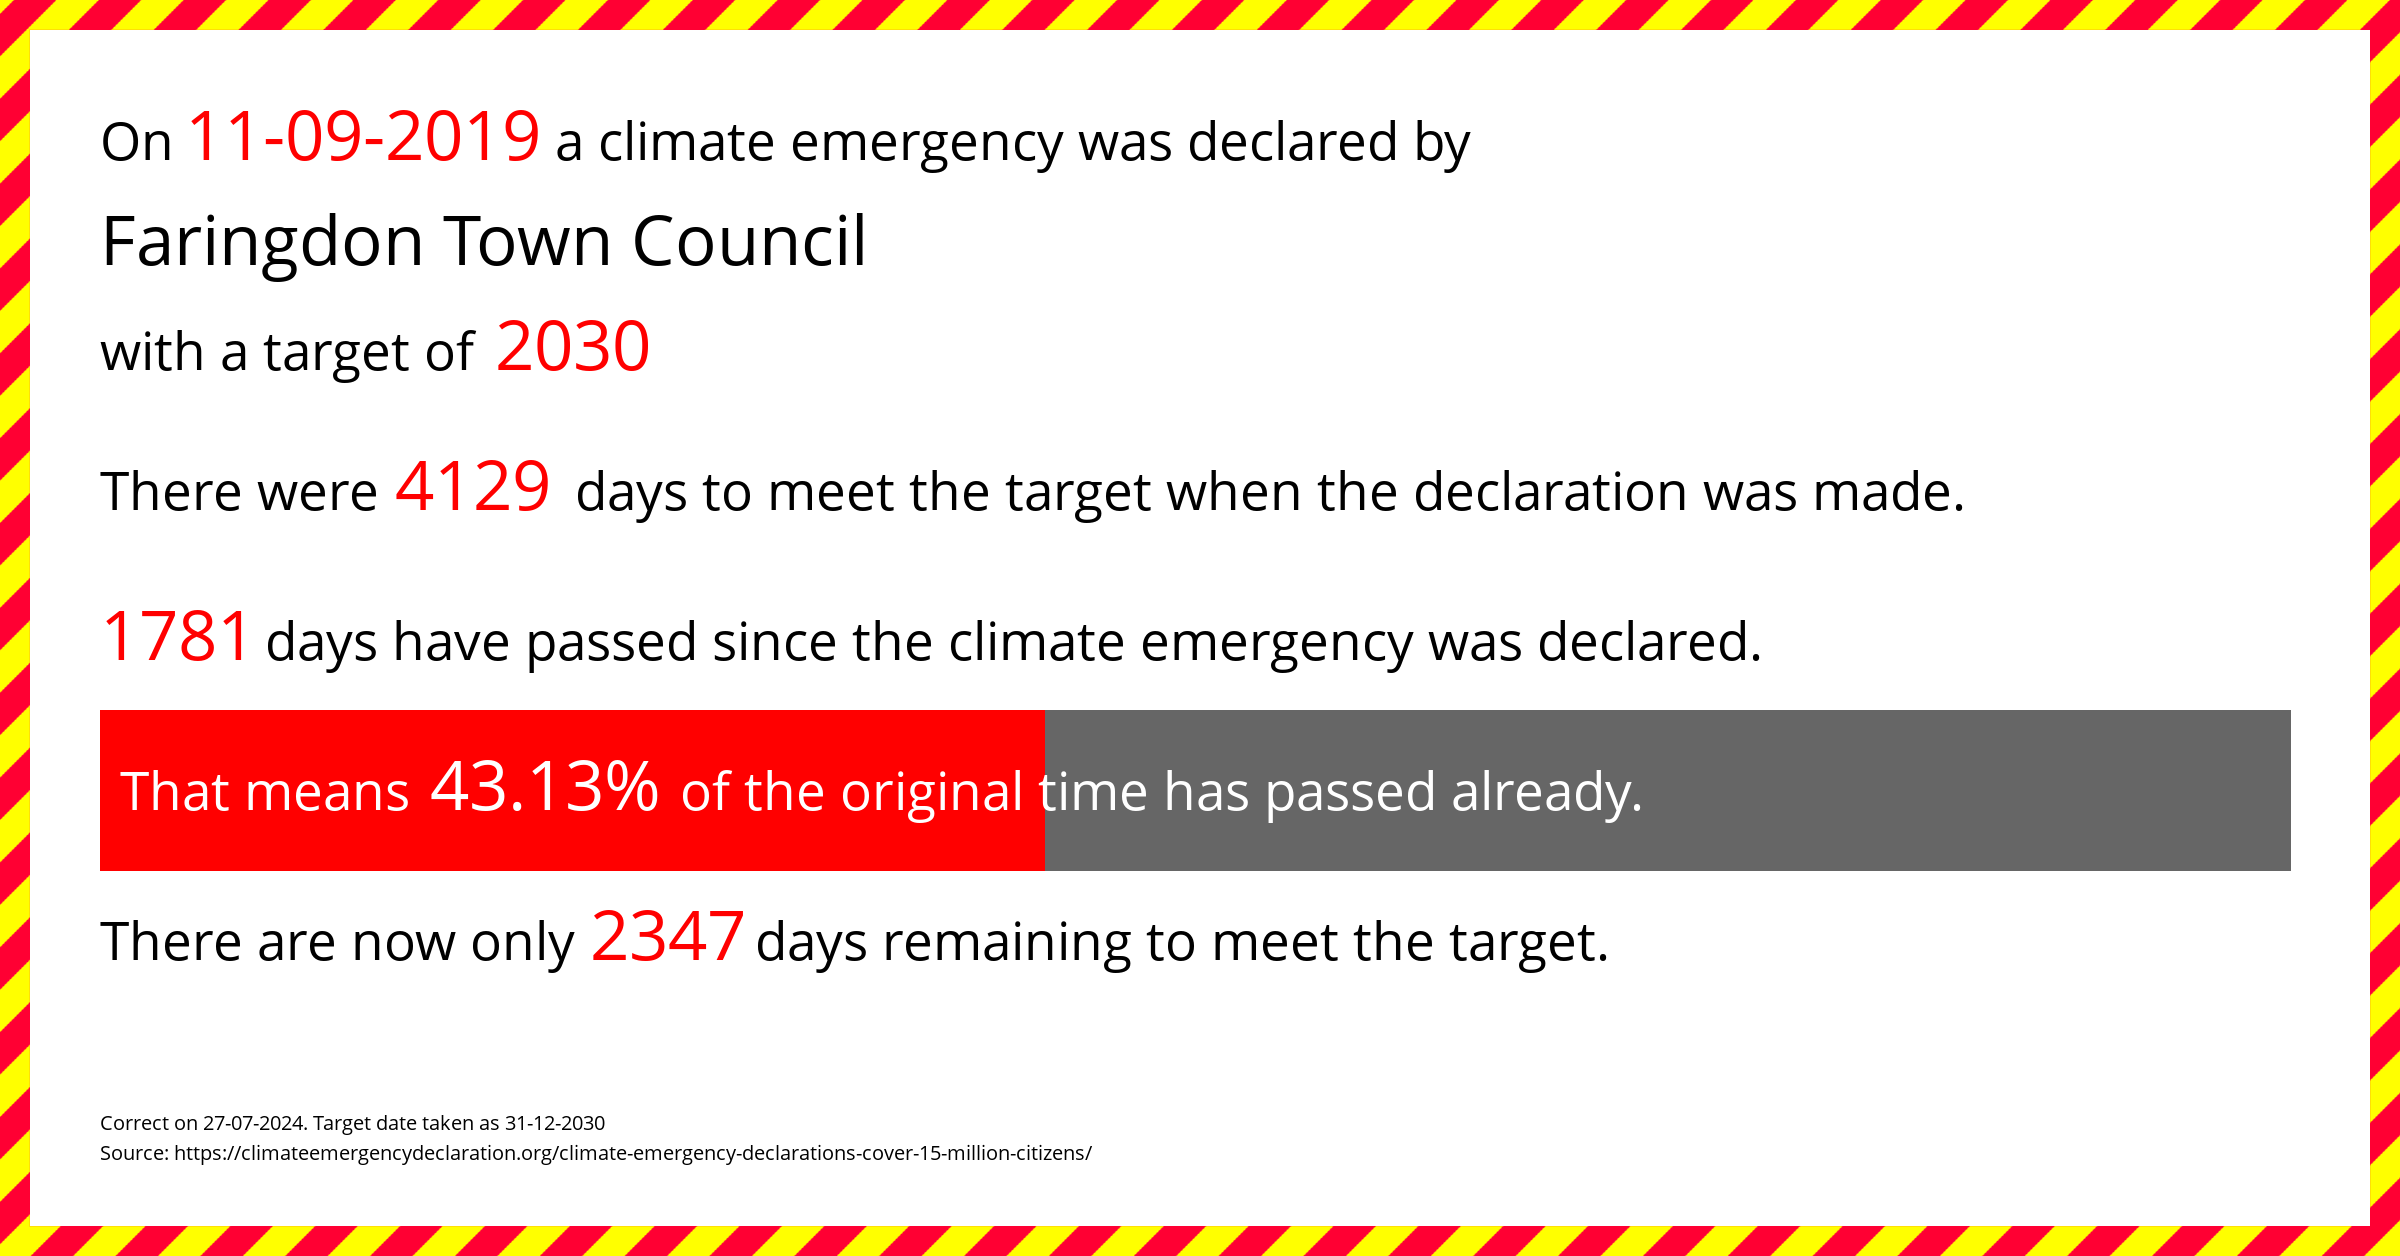 Faringdon Town Council declared a Climate emergency on Wednesday 11th September 2019, with a target of 2030.